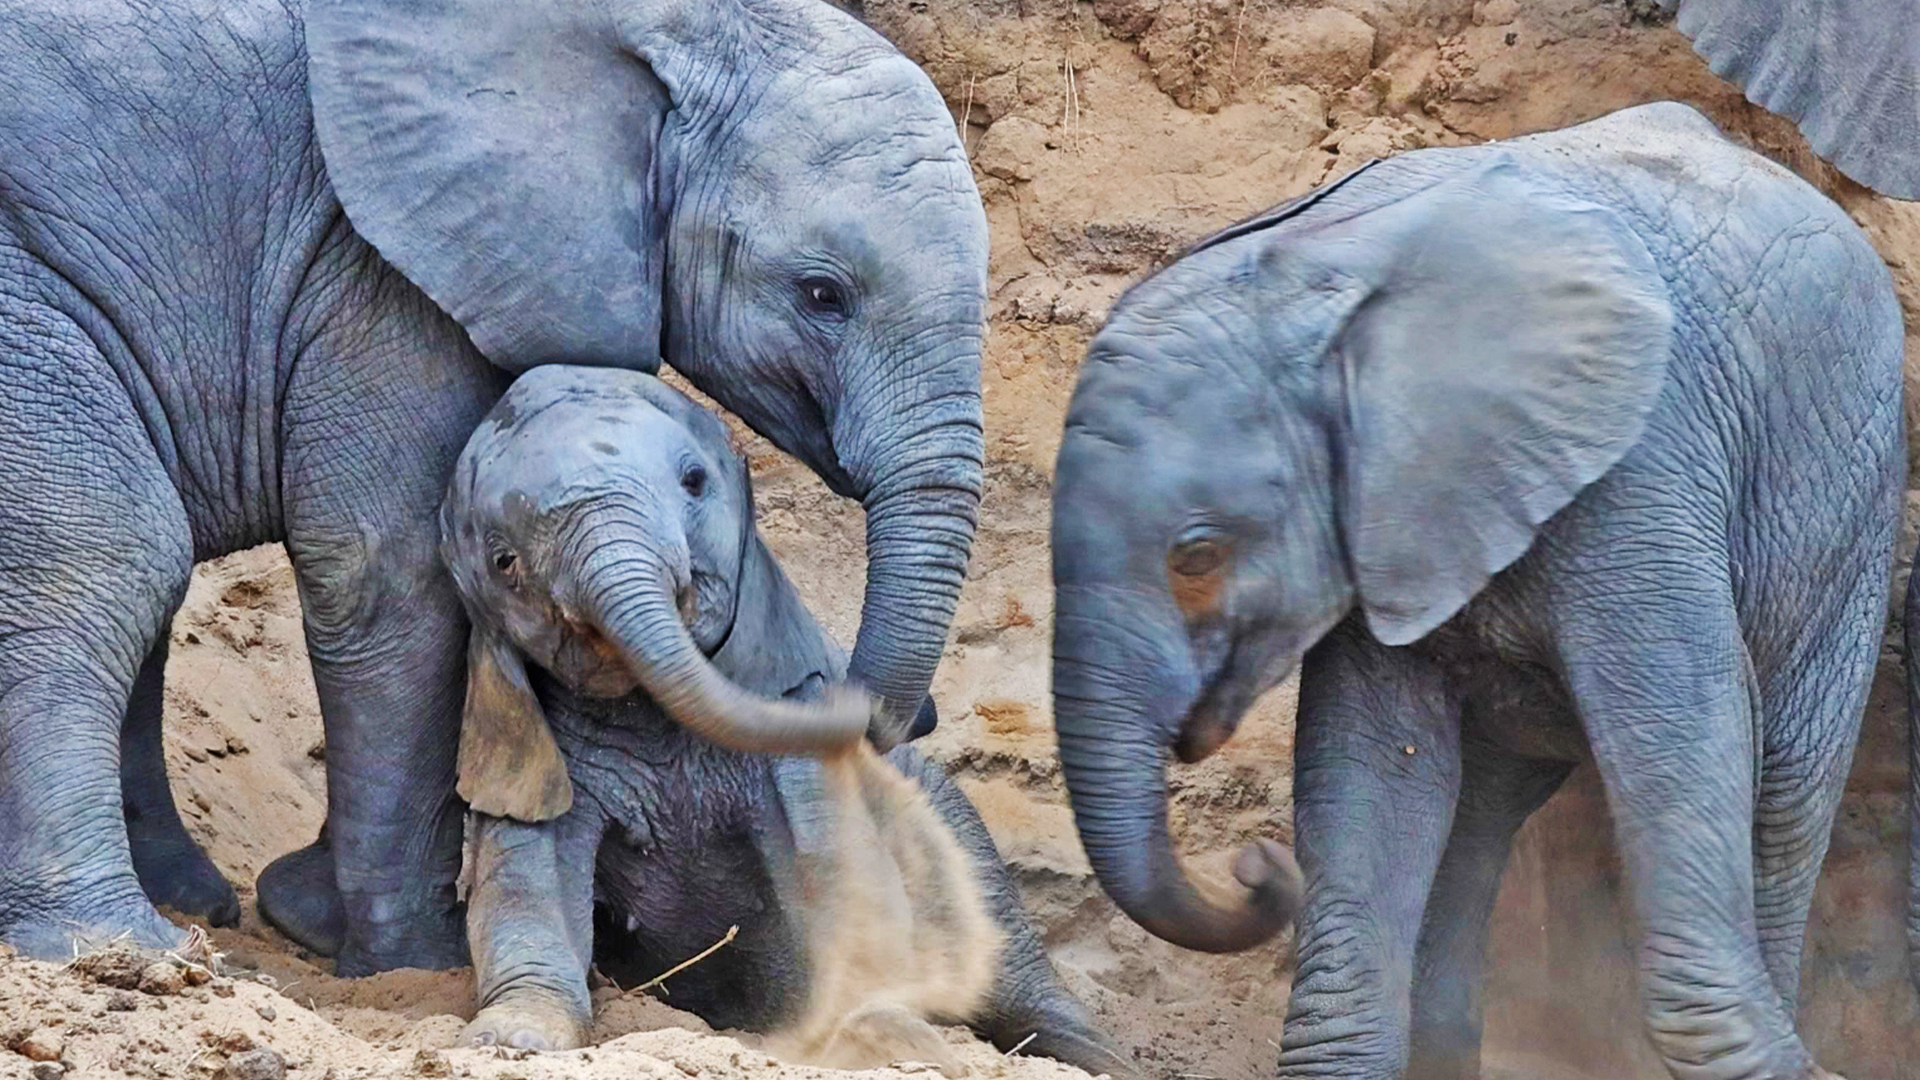 The complex social interactions, intelligence, and emotional depth of elephants make them fascinating to watch. Tourists are often captivated by their family dynamics, nurturing behavior, and the way they interact with their environment, including their playful antics and caring for their young.